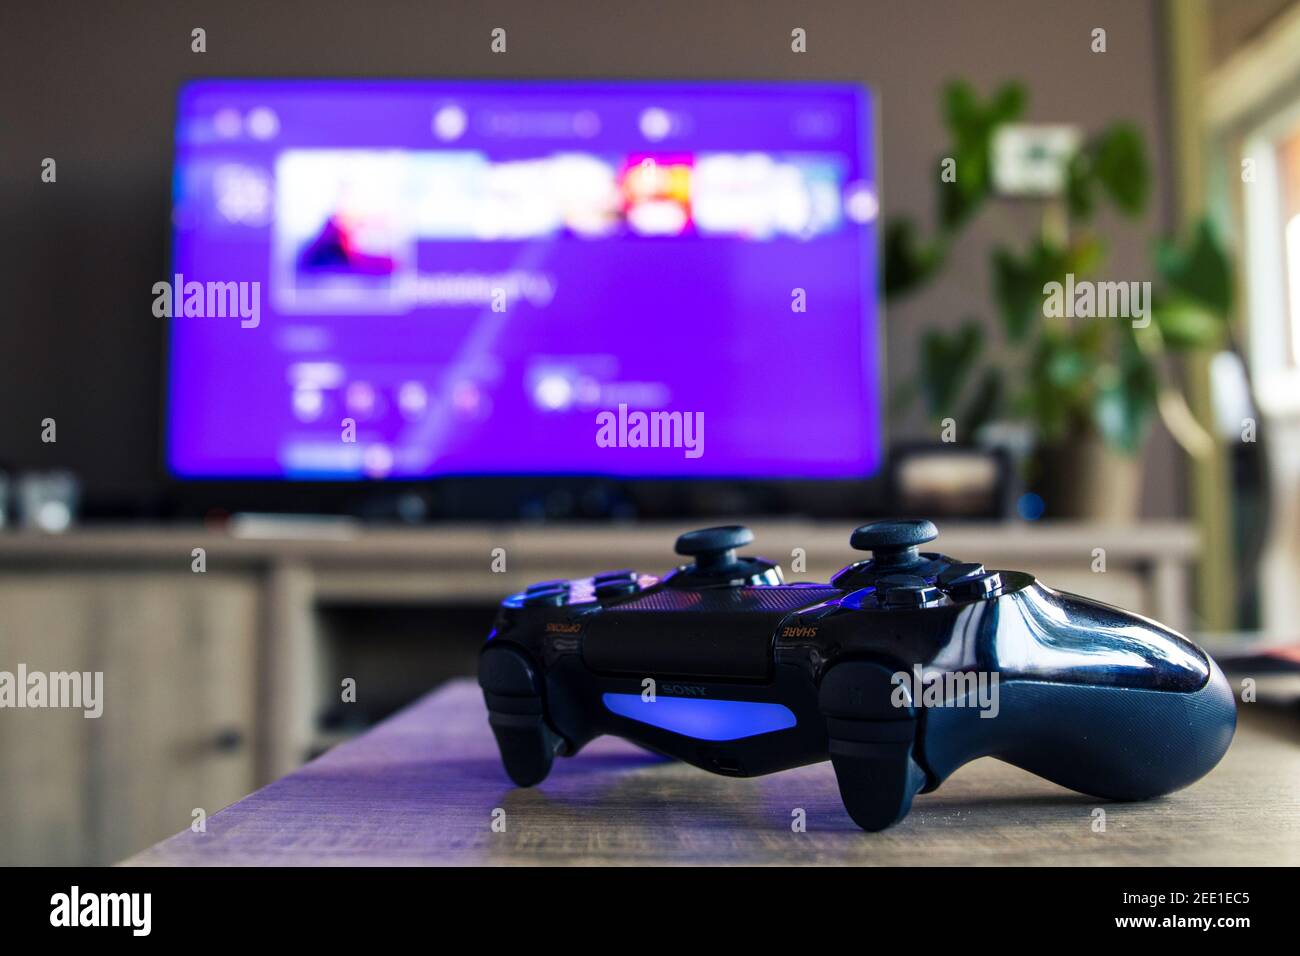 A Closeup Portrait Of A Sony Playstation 4 Controller In Front Of A Television With The Playstation Home Menu Displayed On It The Ps4 Video Game Cont Stock Photo Alamy